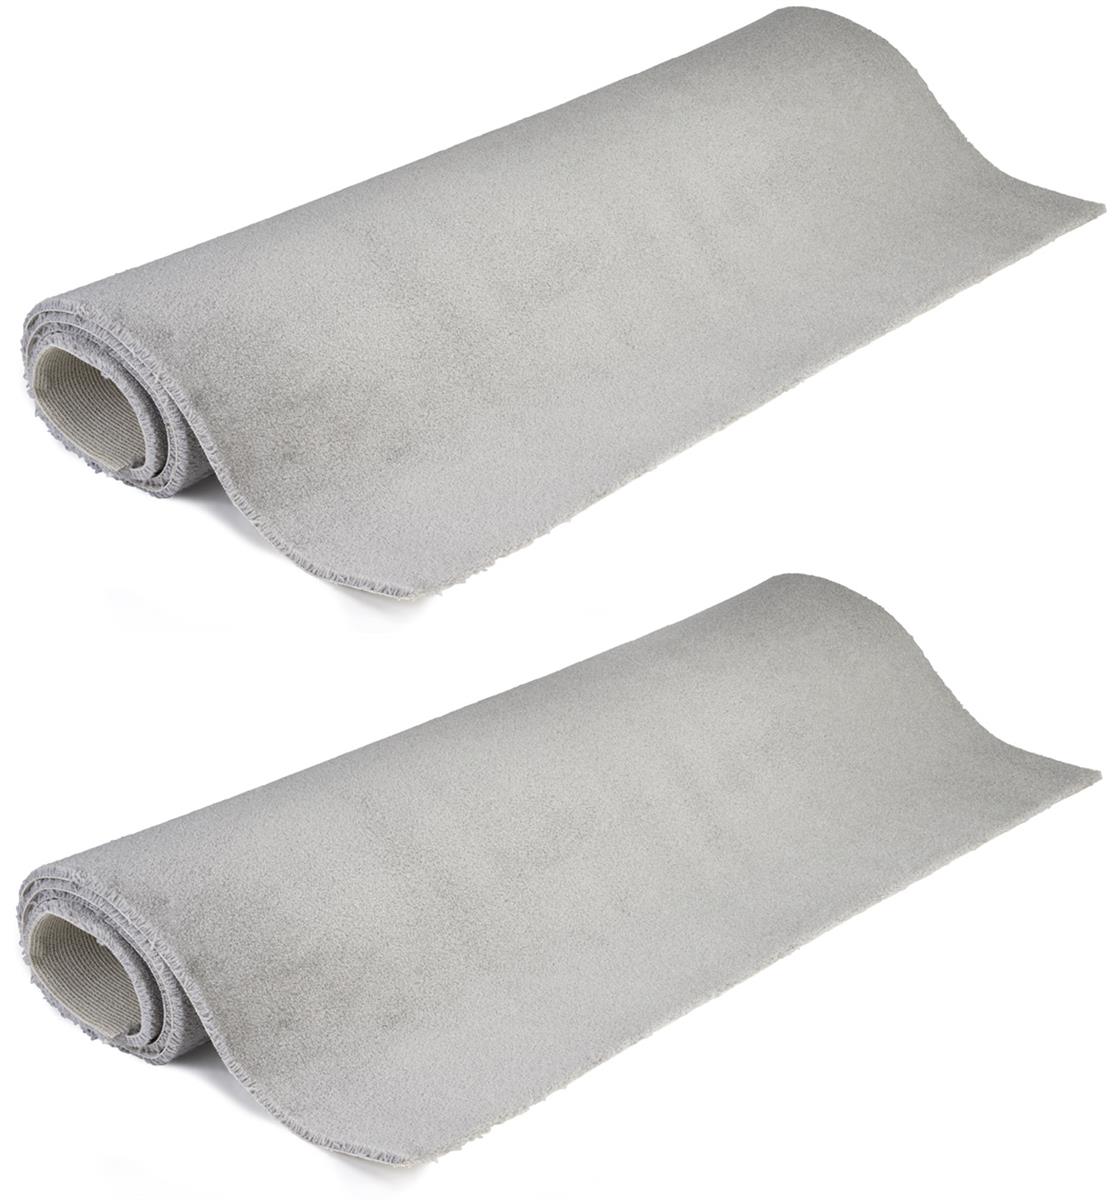 Two rolled gray carpet strips